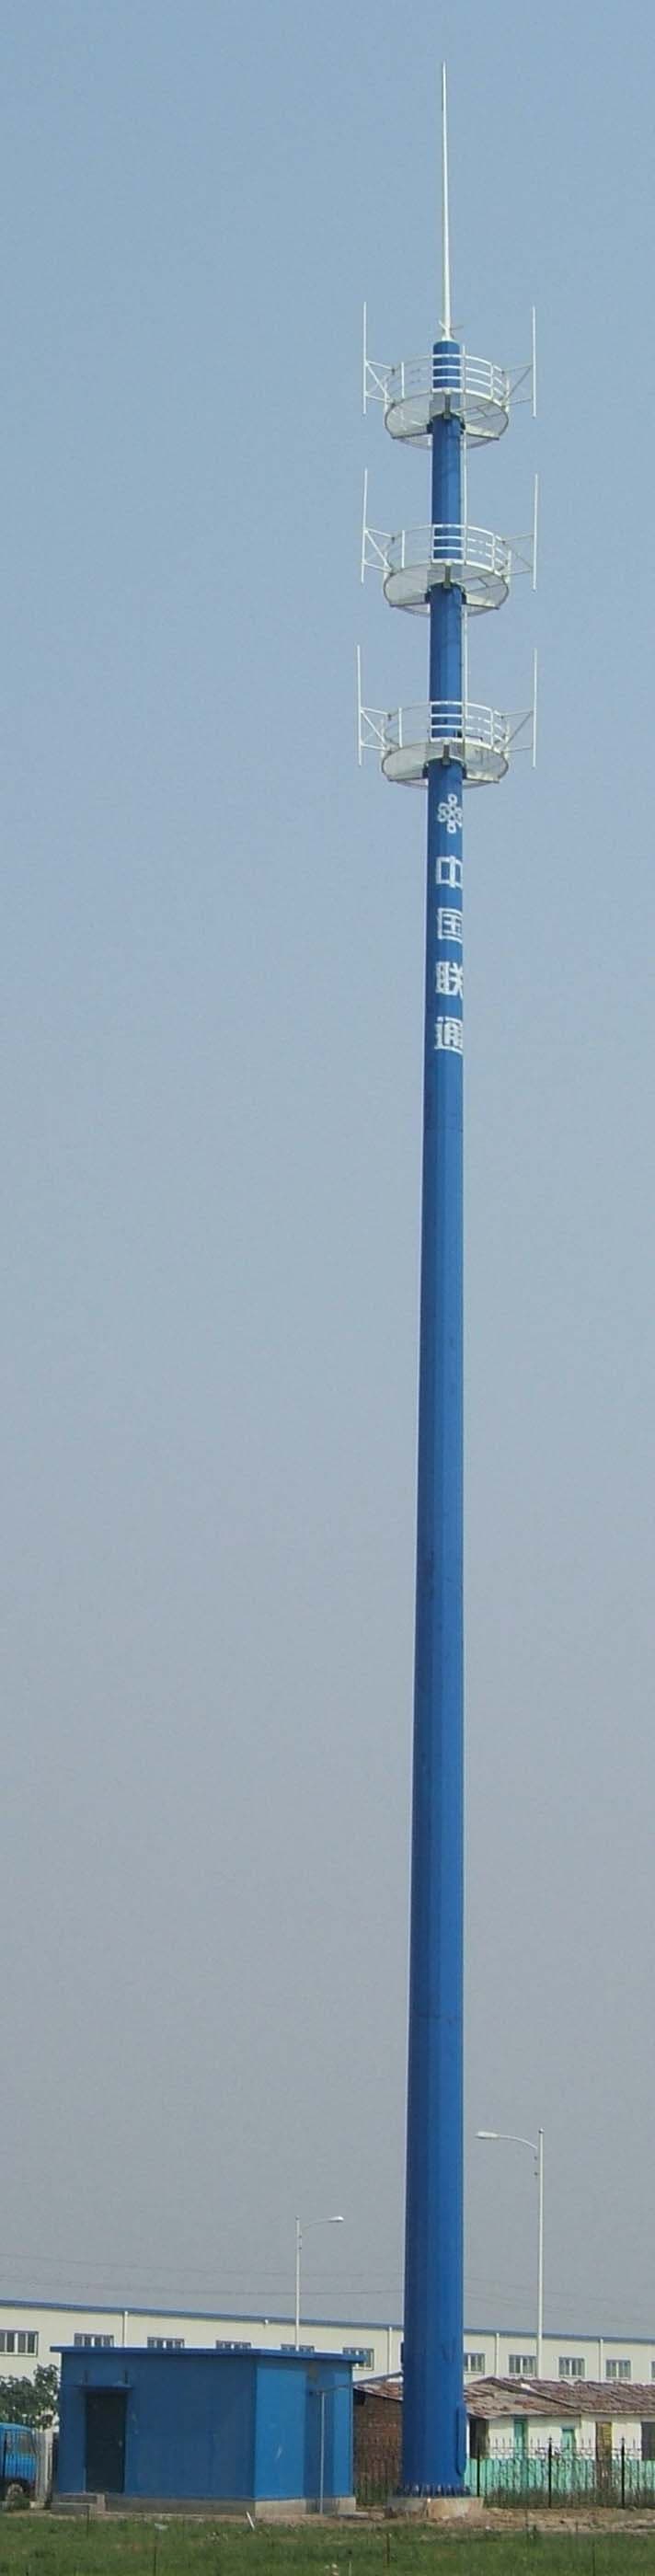 communication tower/teltecom tower/microwave tower/TV tower/monopole